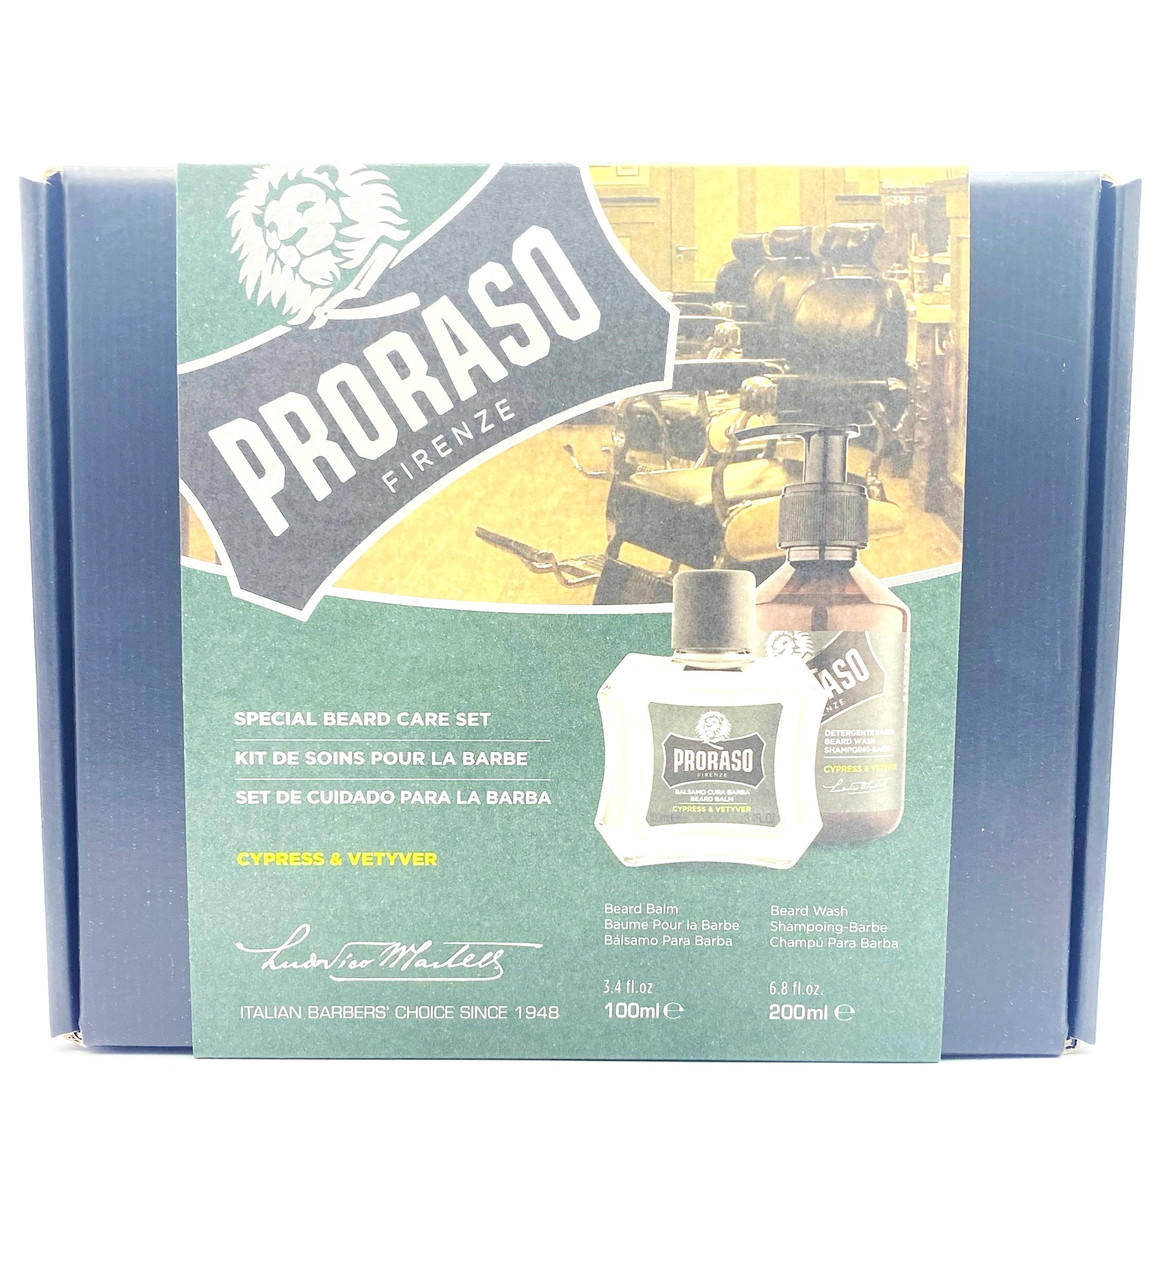 https://cdn11.bigcommerce.com/s-1nr8hwfbkq/images/stencil/1280x1280/products/3283/10363/proraso-special-beard-care-duo-pack-cypress-and-vetyver__43467.1670165116.jpg?c=2